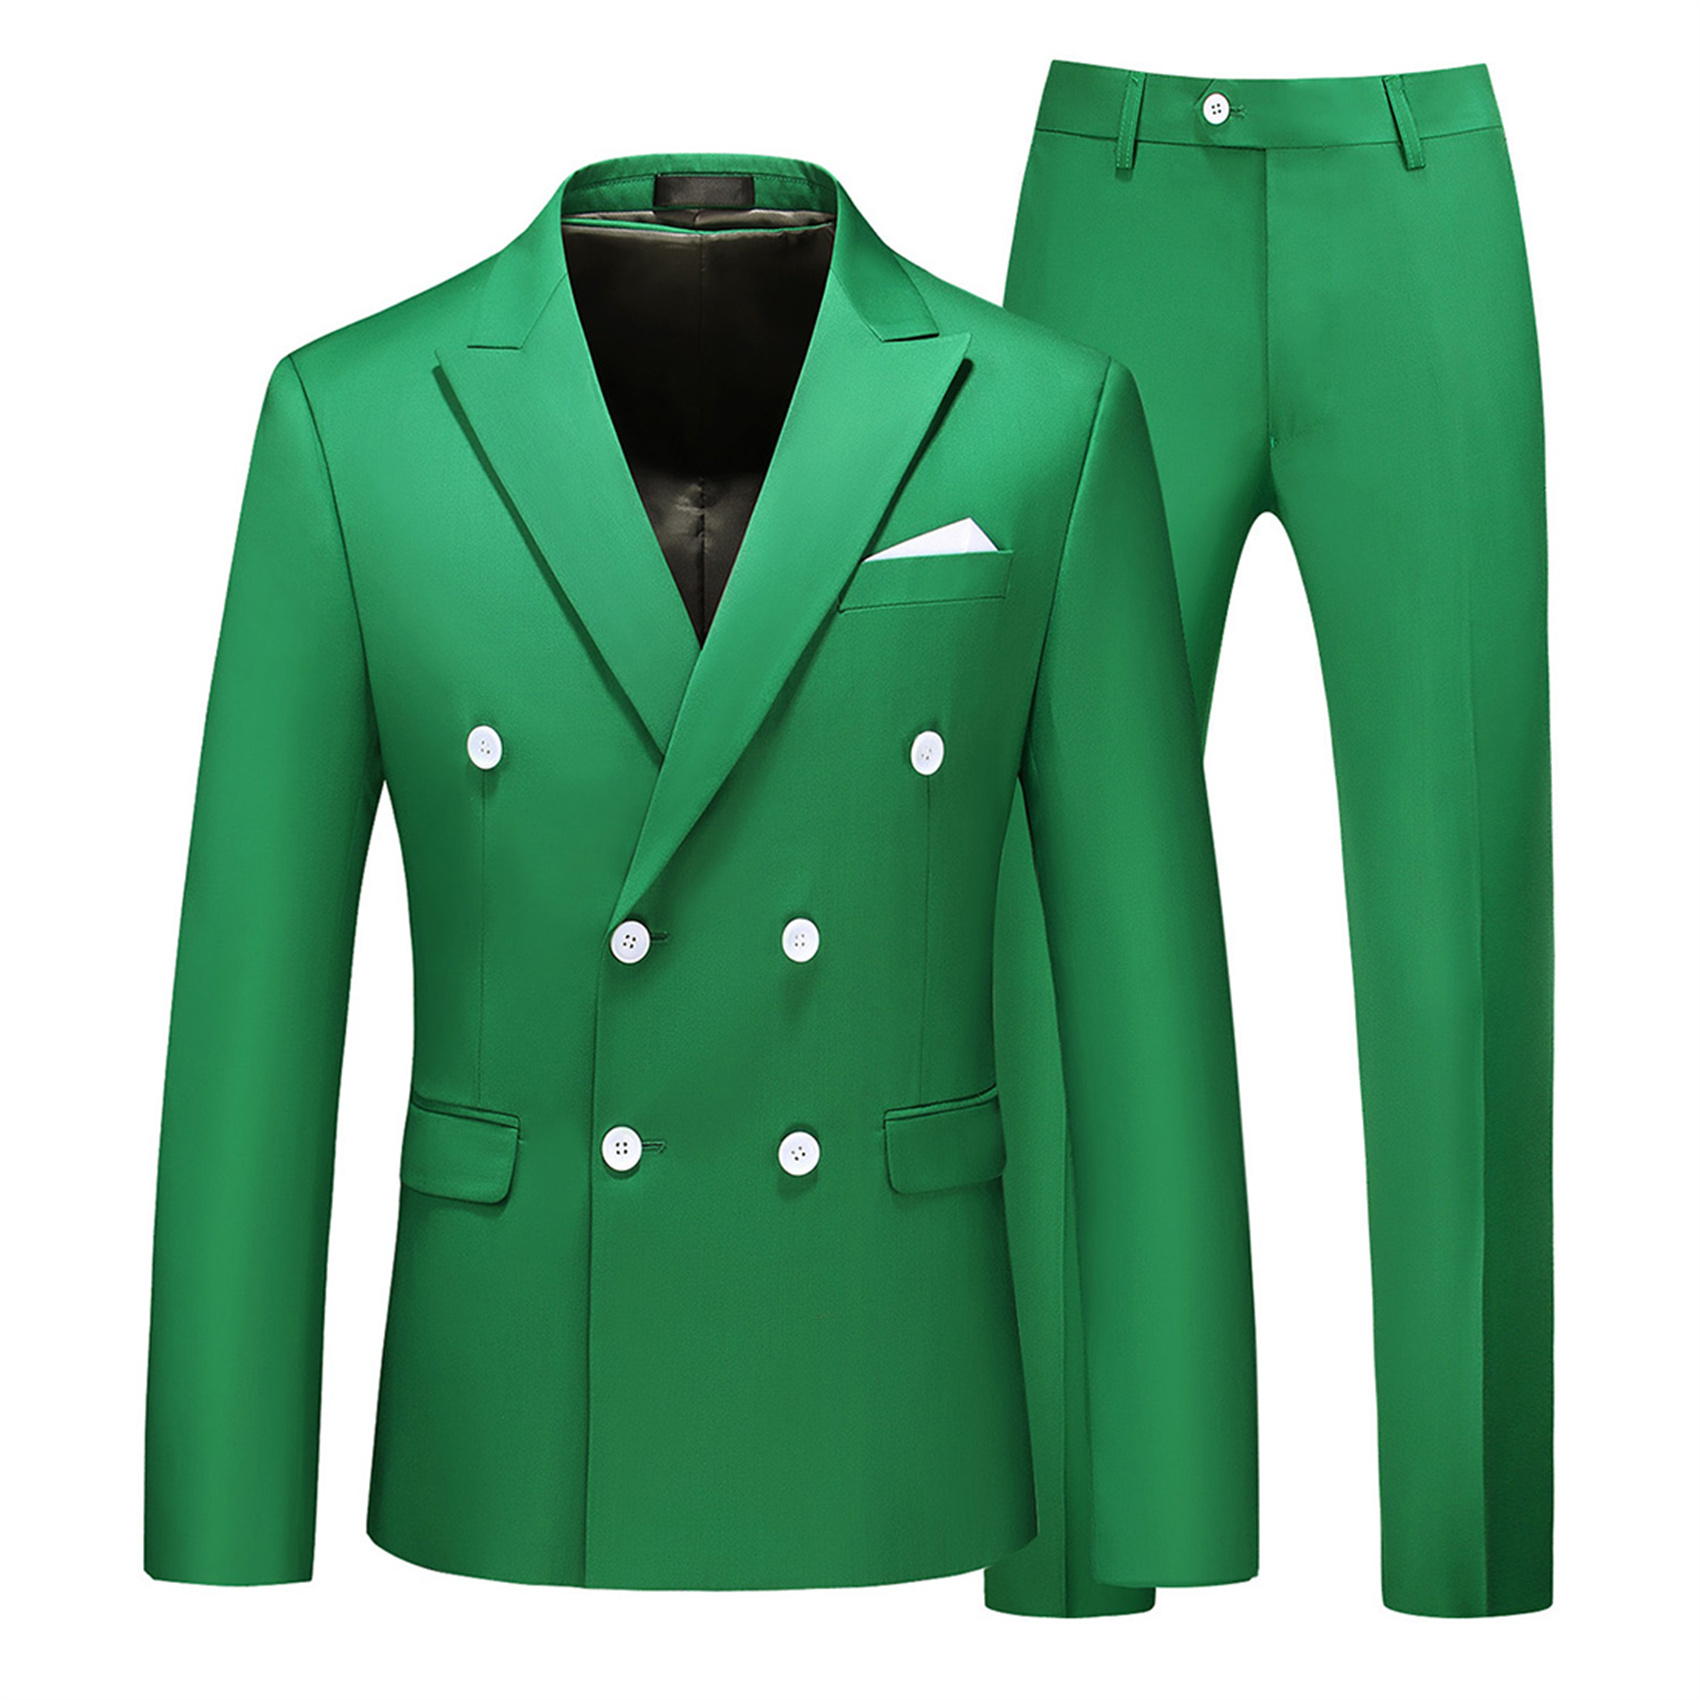 2 Piece Double Breasted Suit for Men, Slim Fit, Green